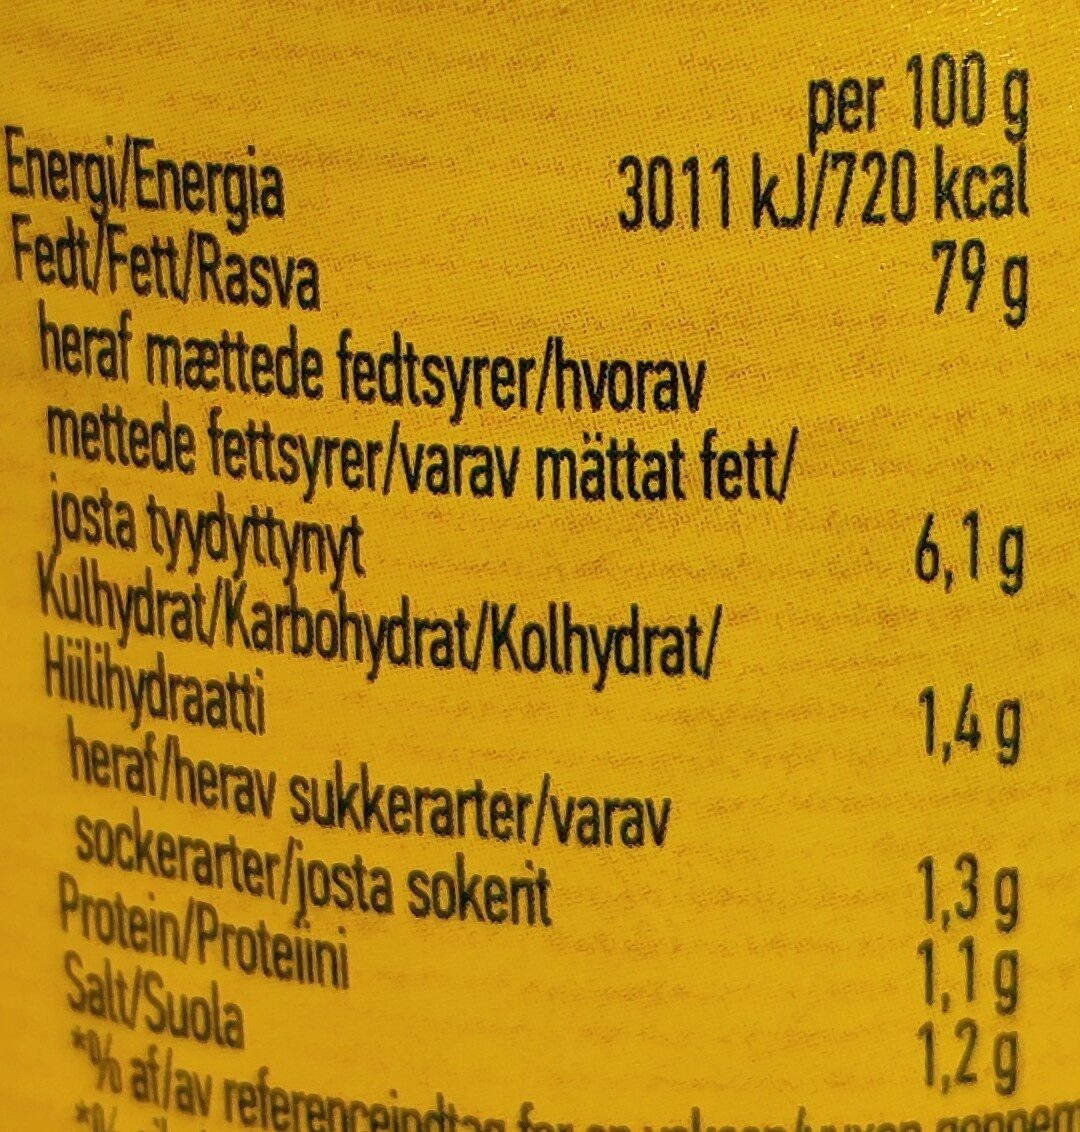 Real Mayonnaise - Nutrition facts